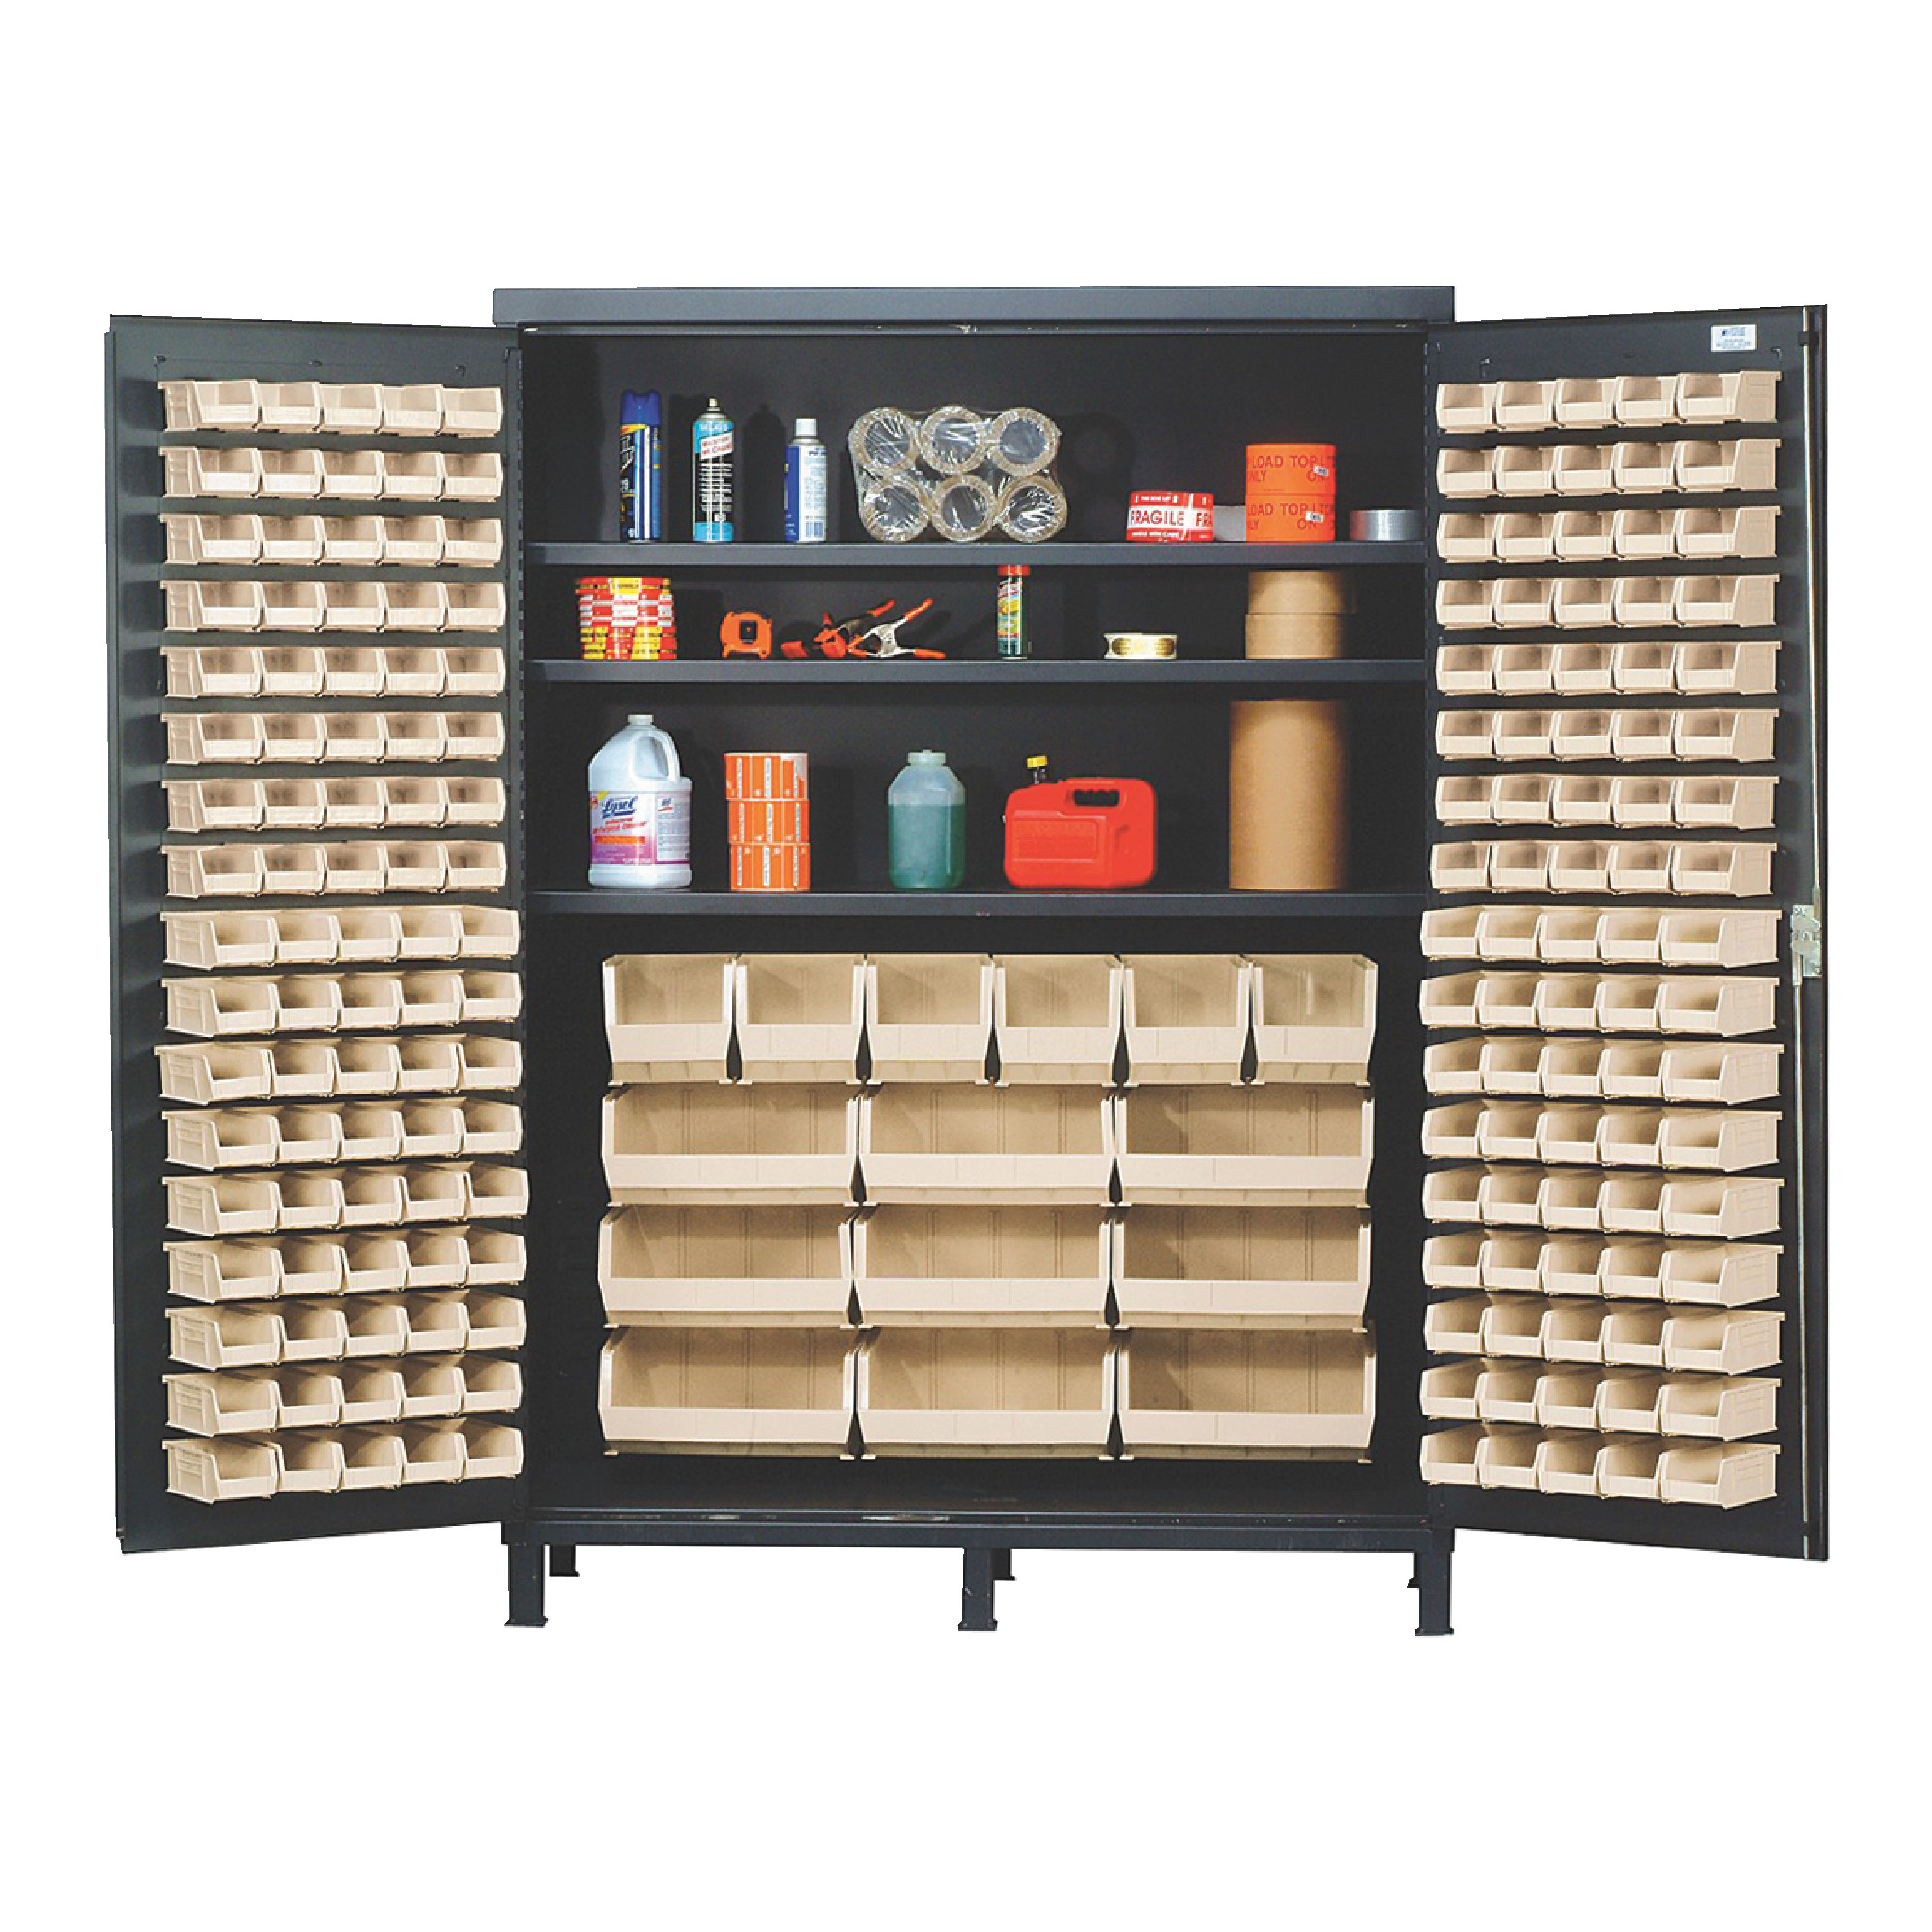 QUANTUM STORAGE SYSTEMS 60" Super Wide Colossal Heavy-Duty Floor Cabinet With 185 Ivory Bins